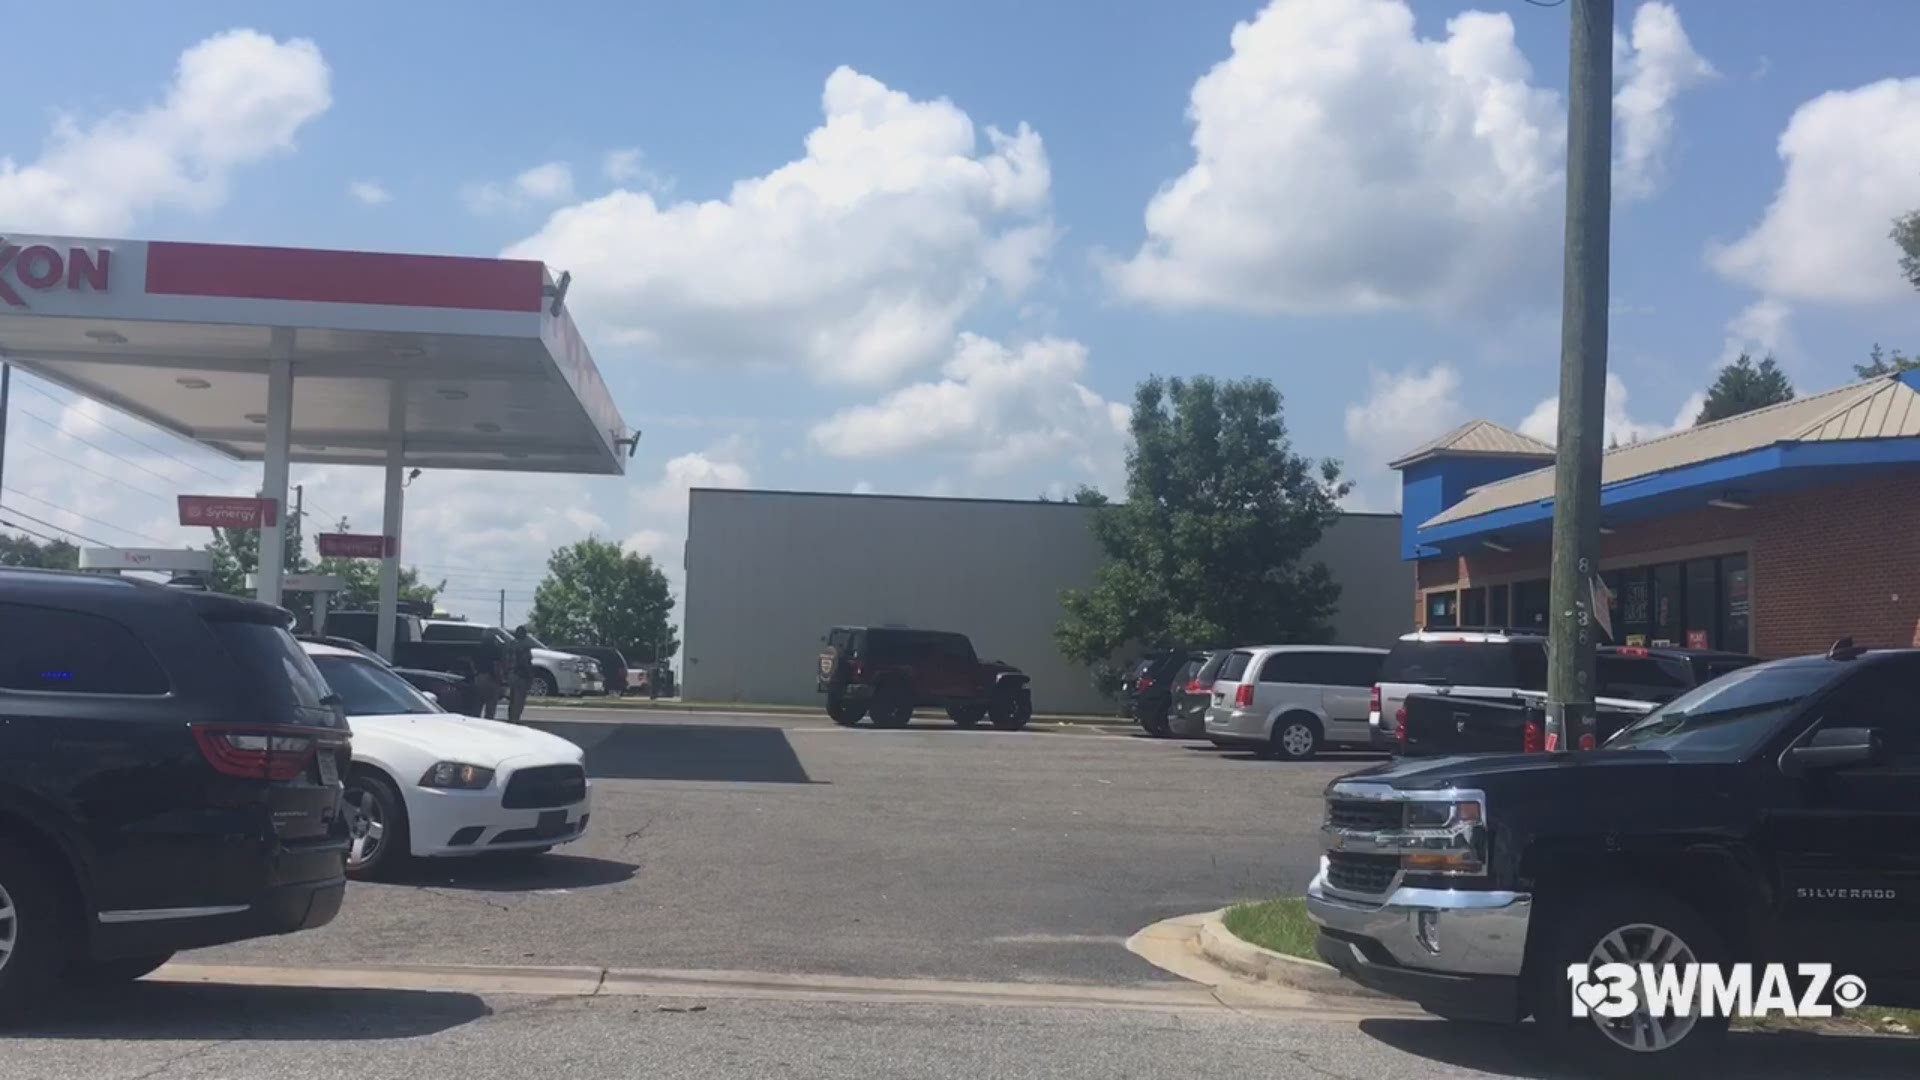 The Georgia Department of Revenue says they raided at least three business in Macon Tuesday for illegal gambling and other crimes. One of them was the Exxon gas station on Pio Nono Avenue.